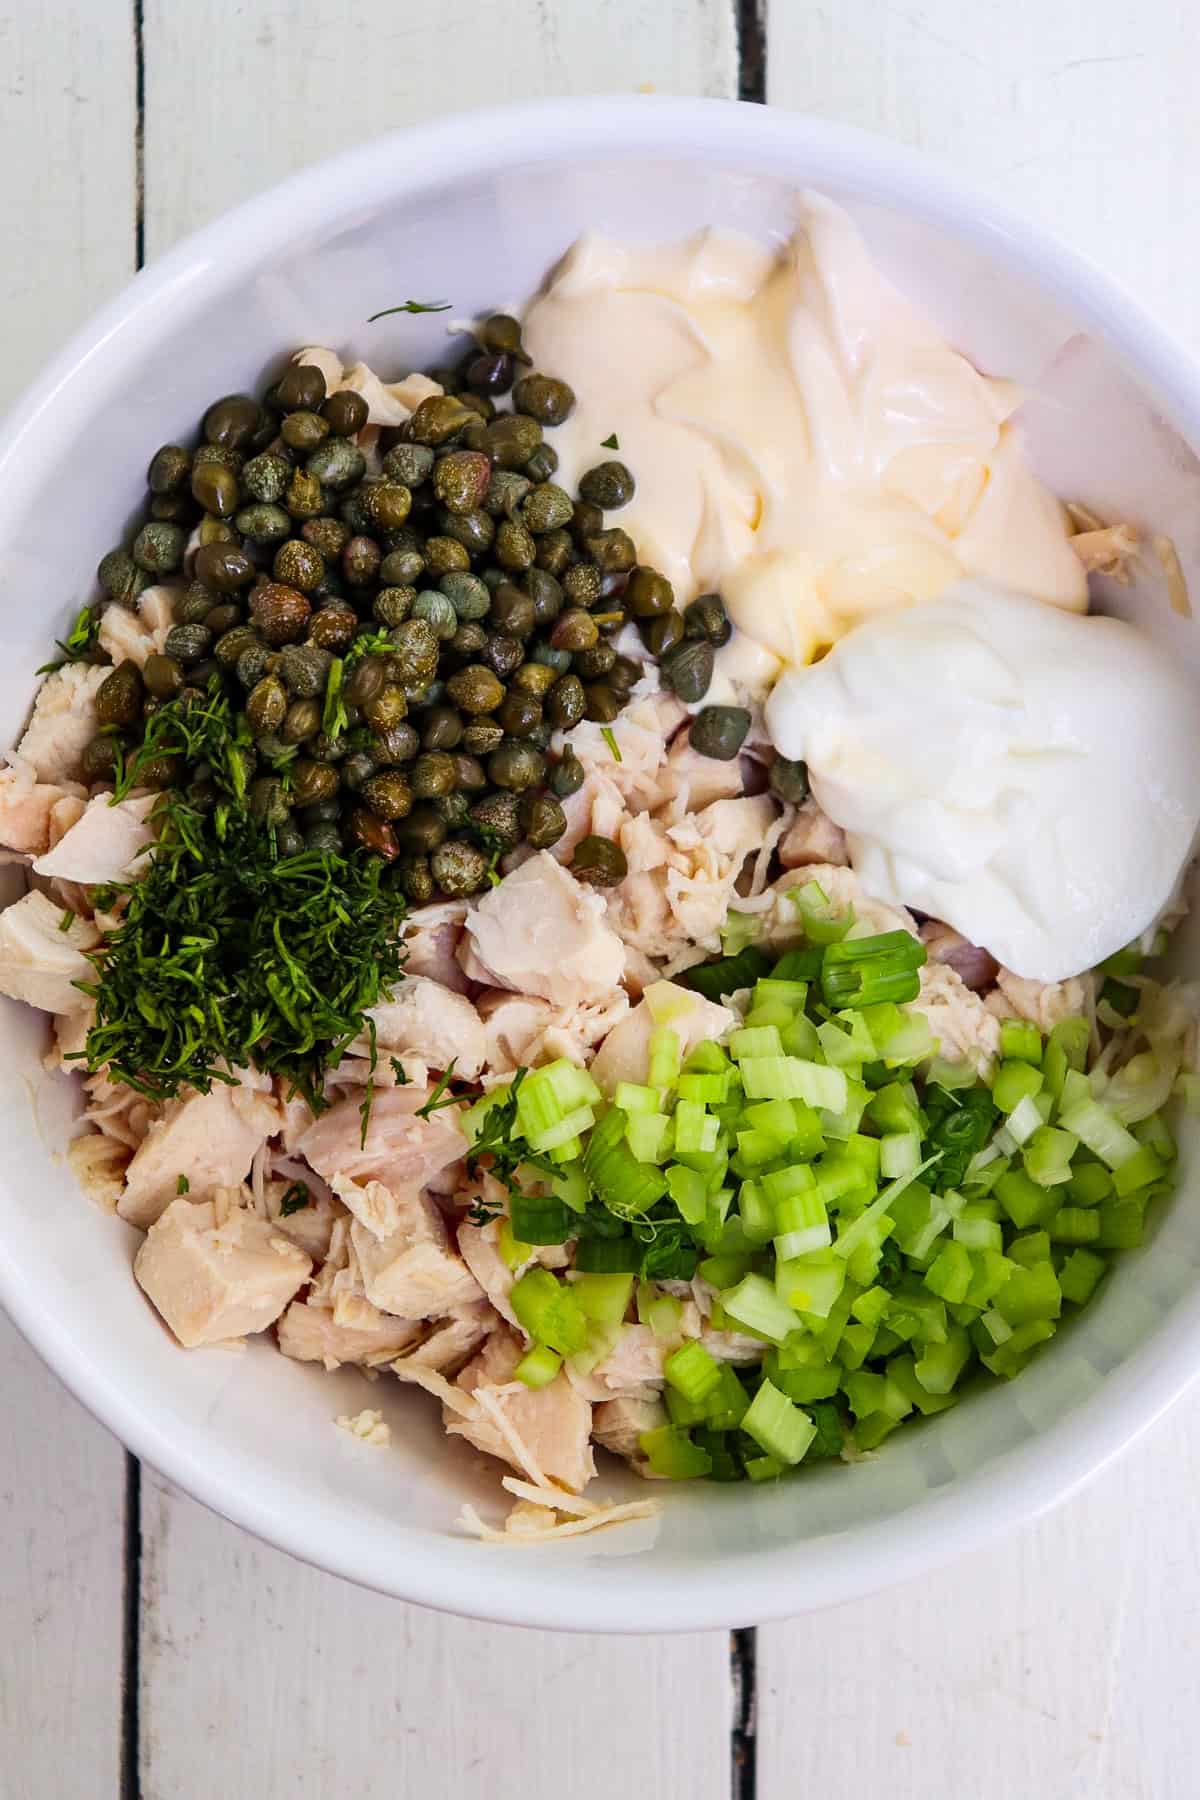 caper chicken salad ingredients unmixed in a white bowl.